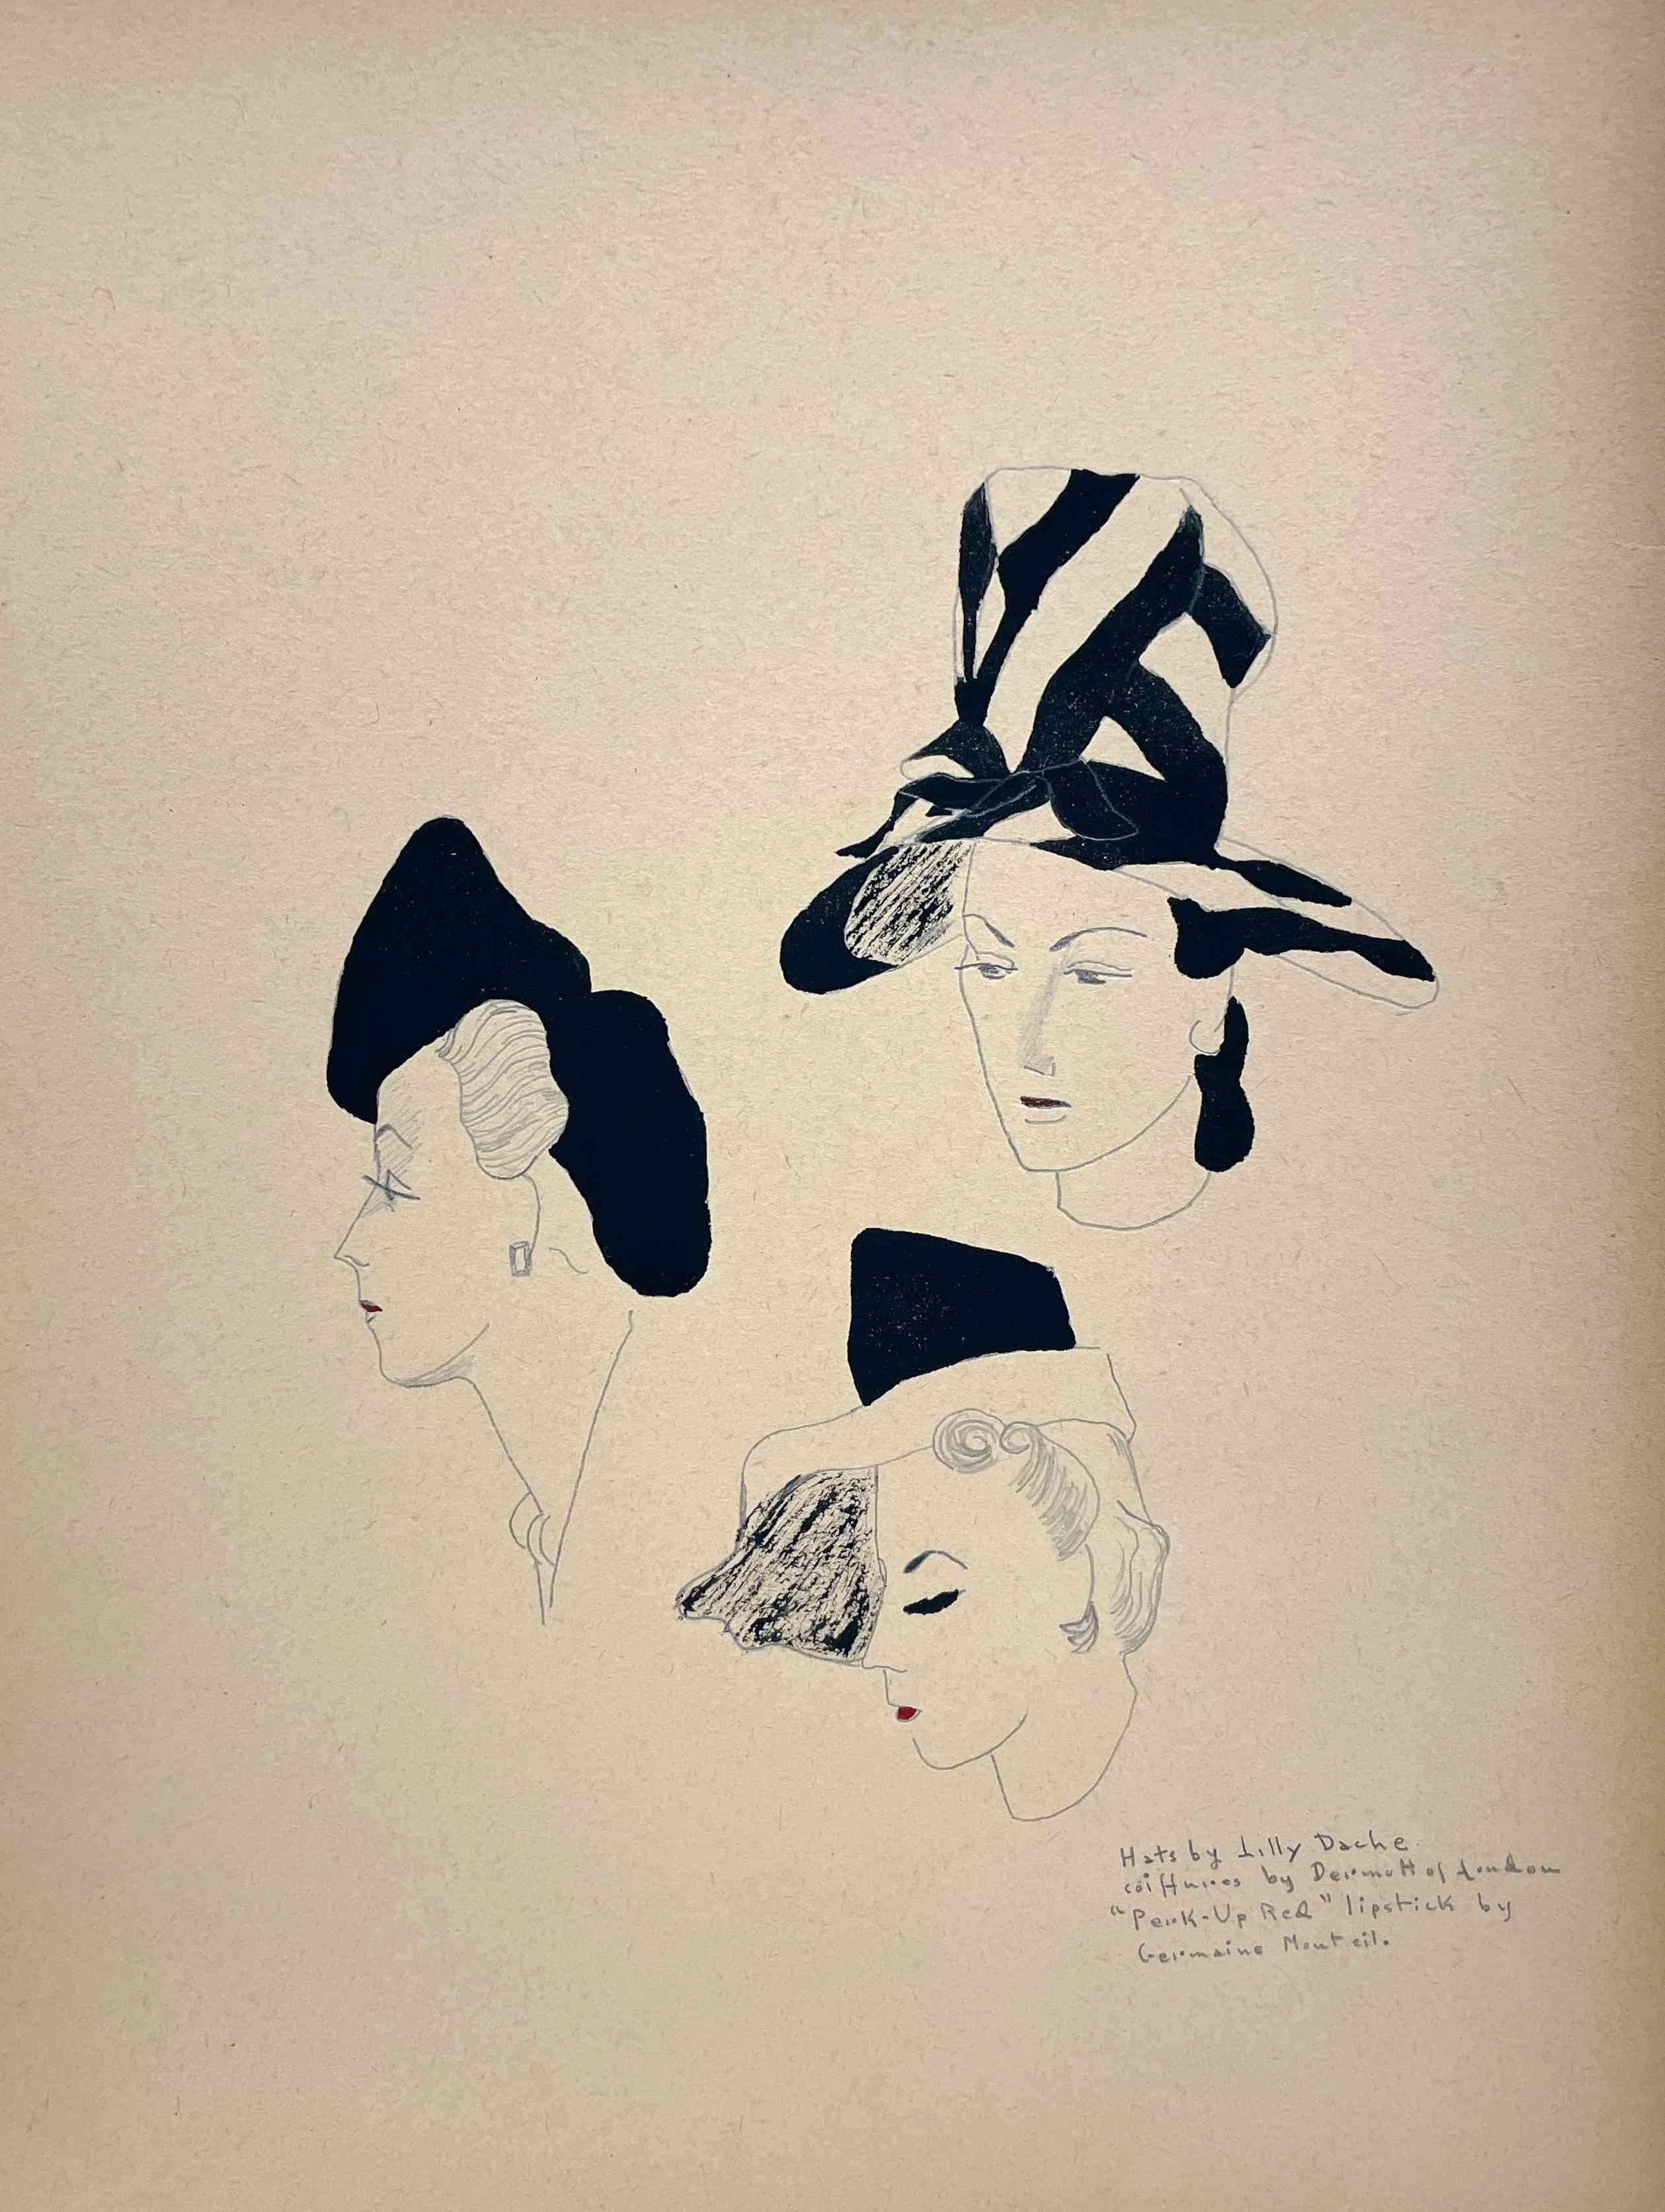 A 1940s Black & WhiteFashion Study for Lily Daché Hat Designs